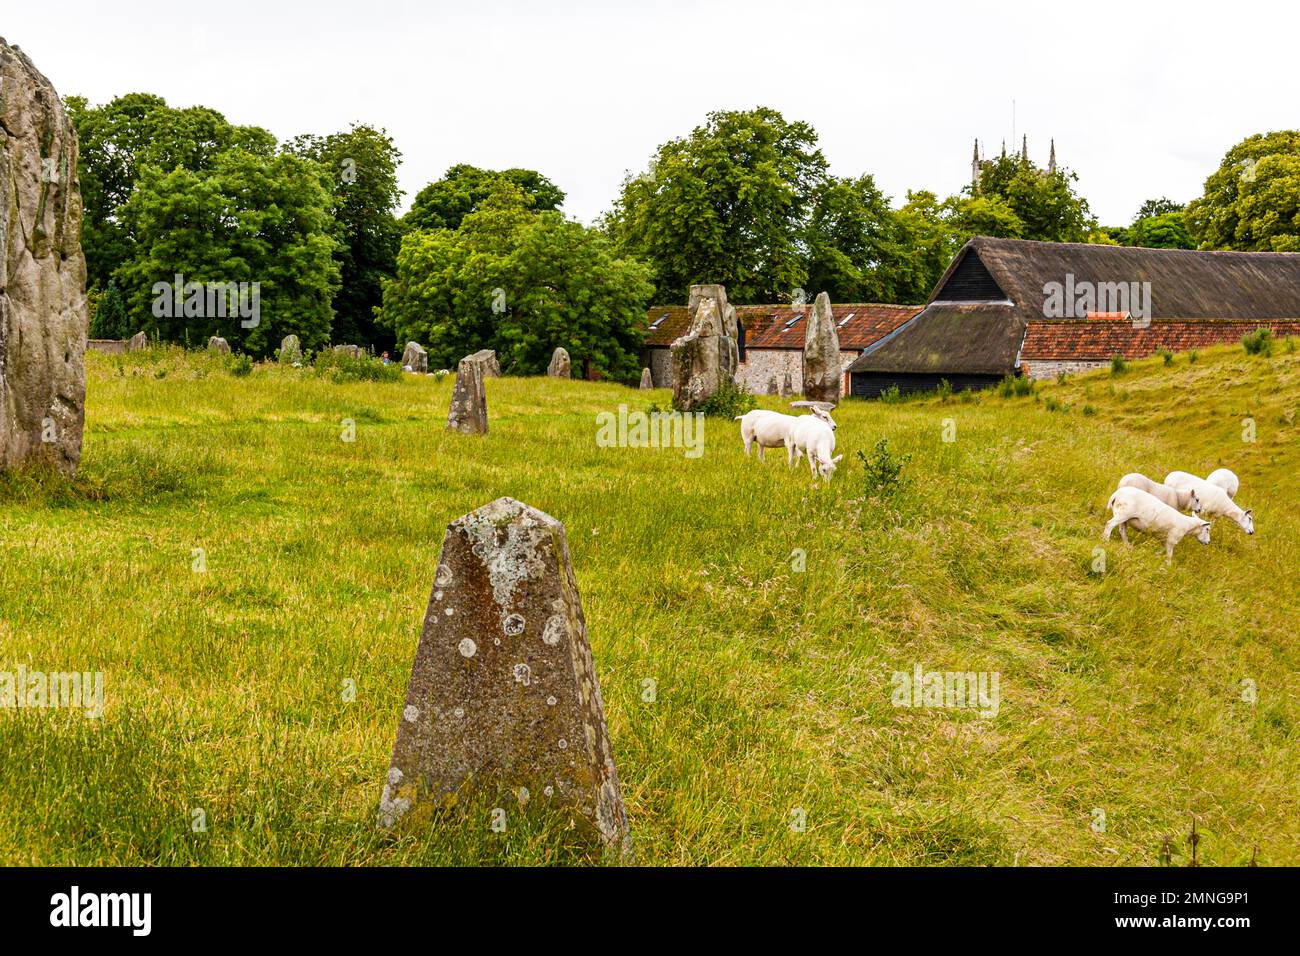 The stone circle of Avebury is one of the largest stone circles in the British Isles. Its origin is dated to 2,600 BC. Originally it consisted of more than 600 stones. Over the millennia, this was partially removed by the landowners or used for house building. Avebury, Marlborough, England Stock Photo